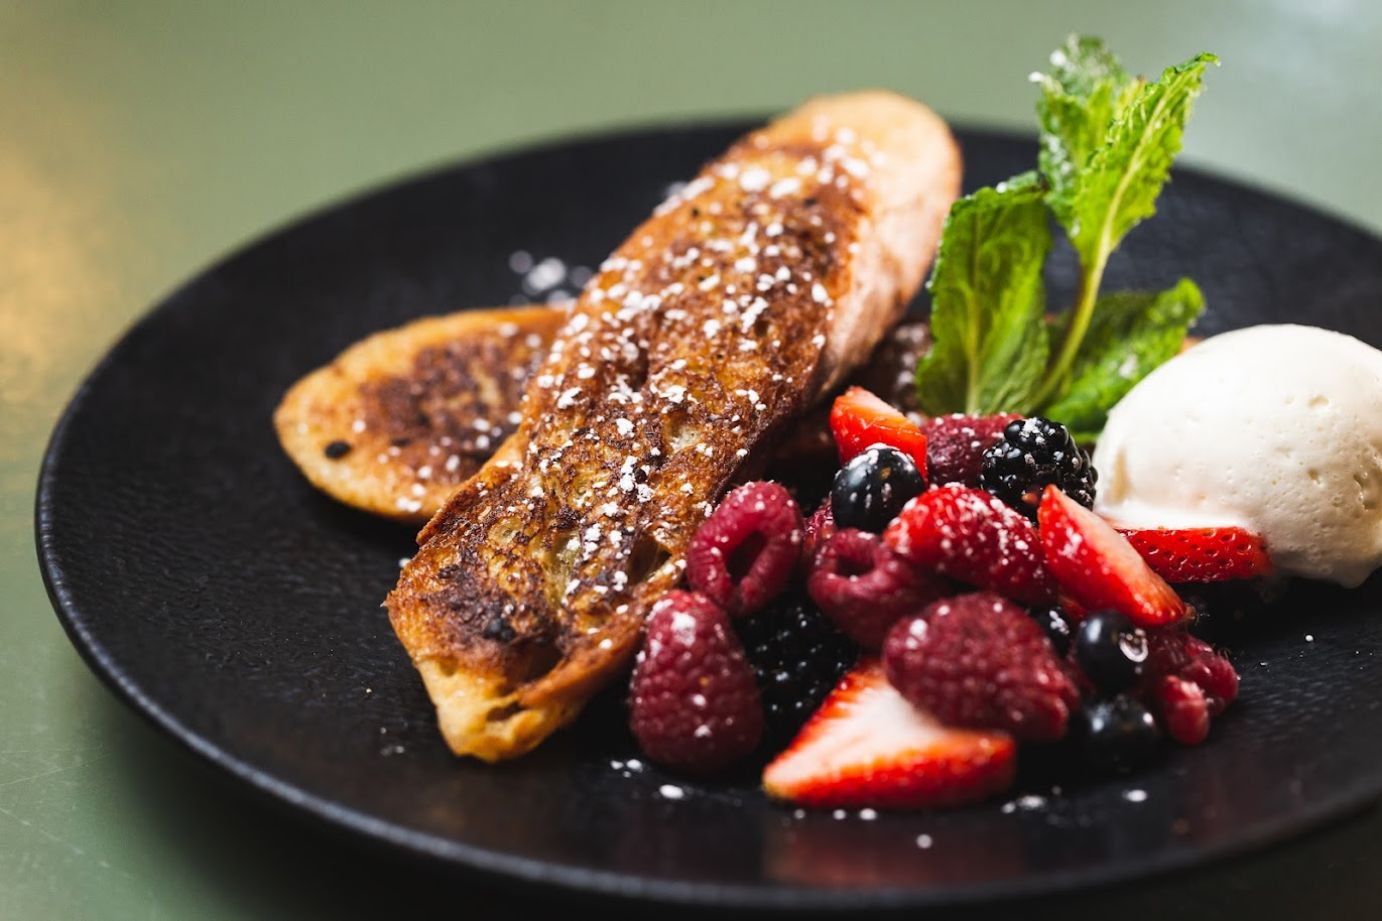 French toast with powdered sugar and fresh berries, butter and mint leaf garnish